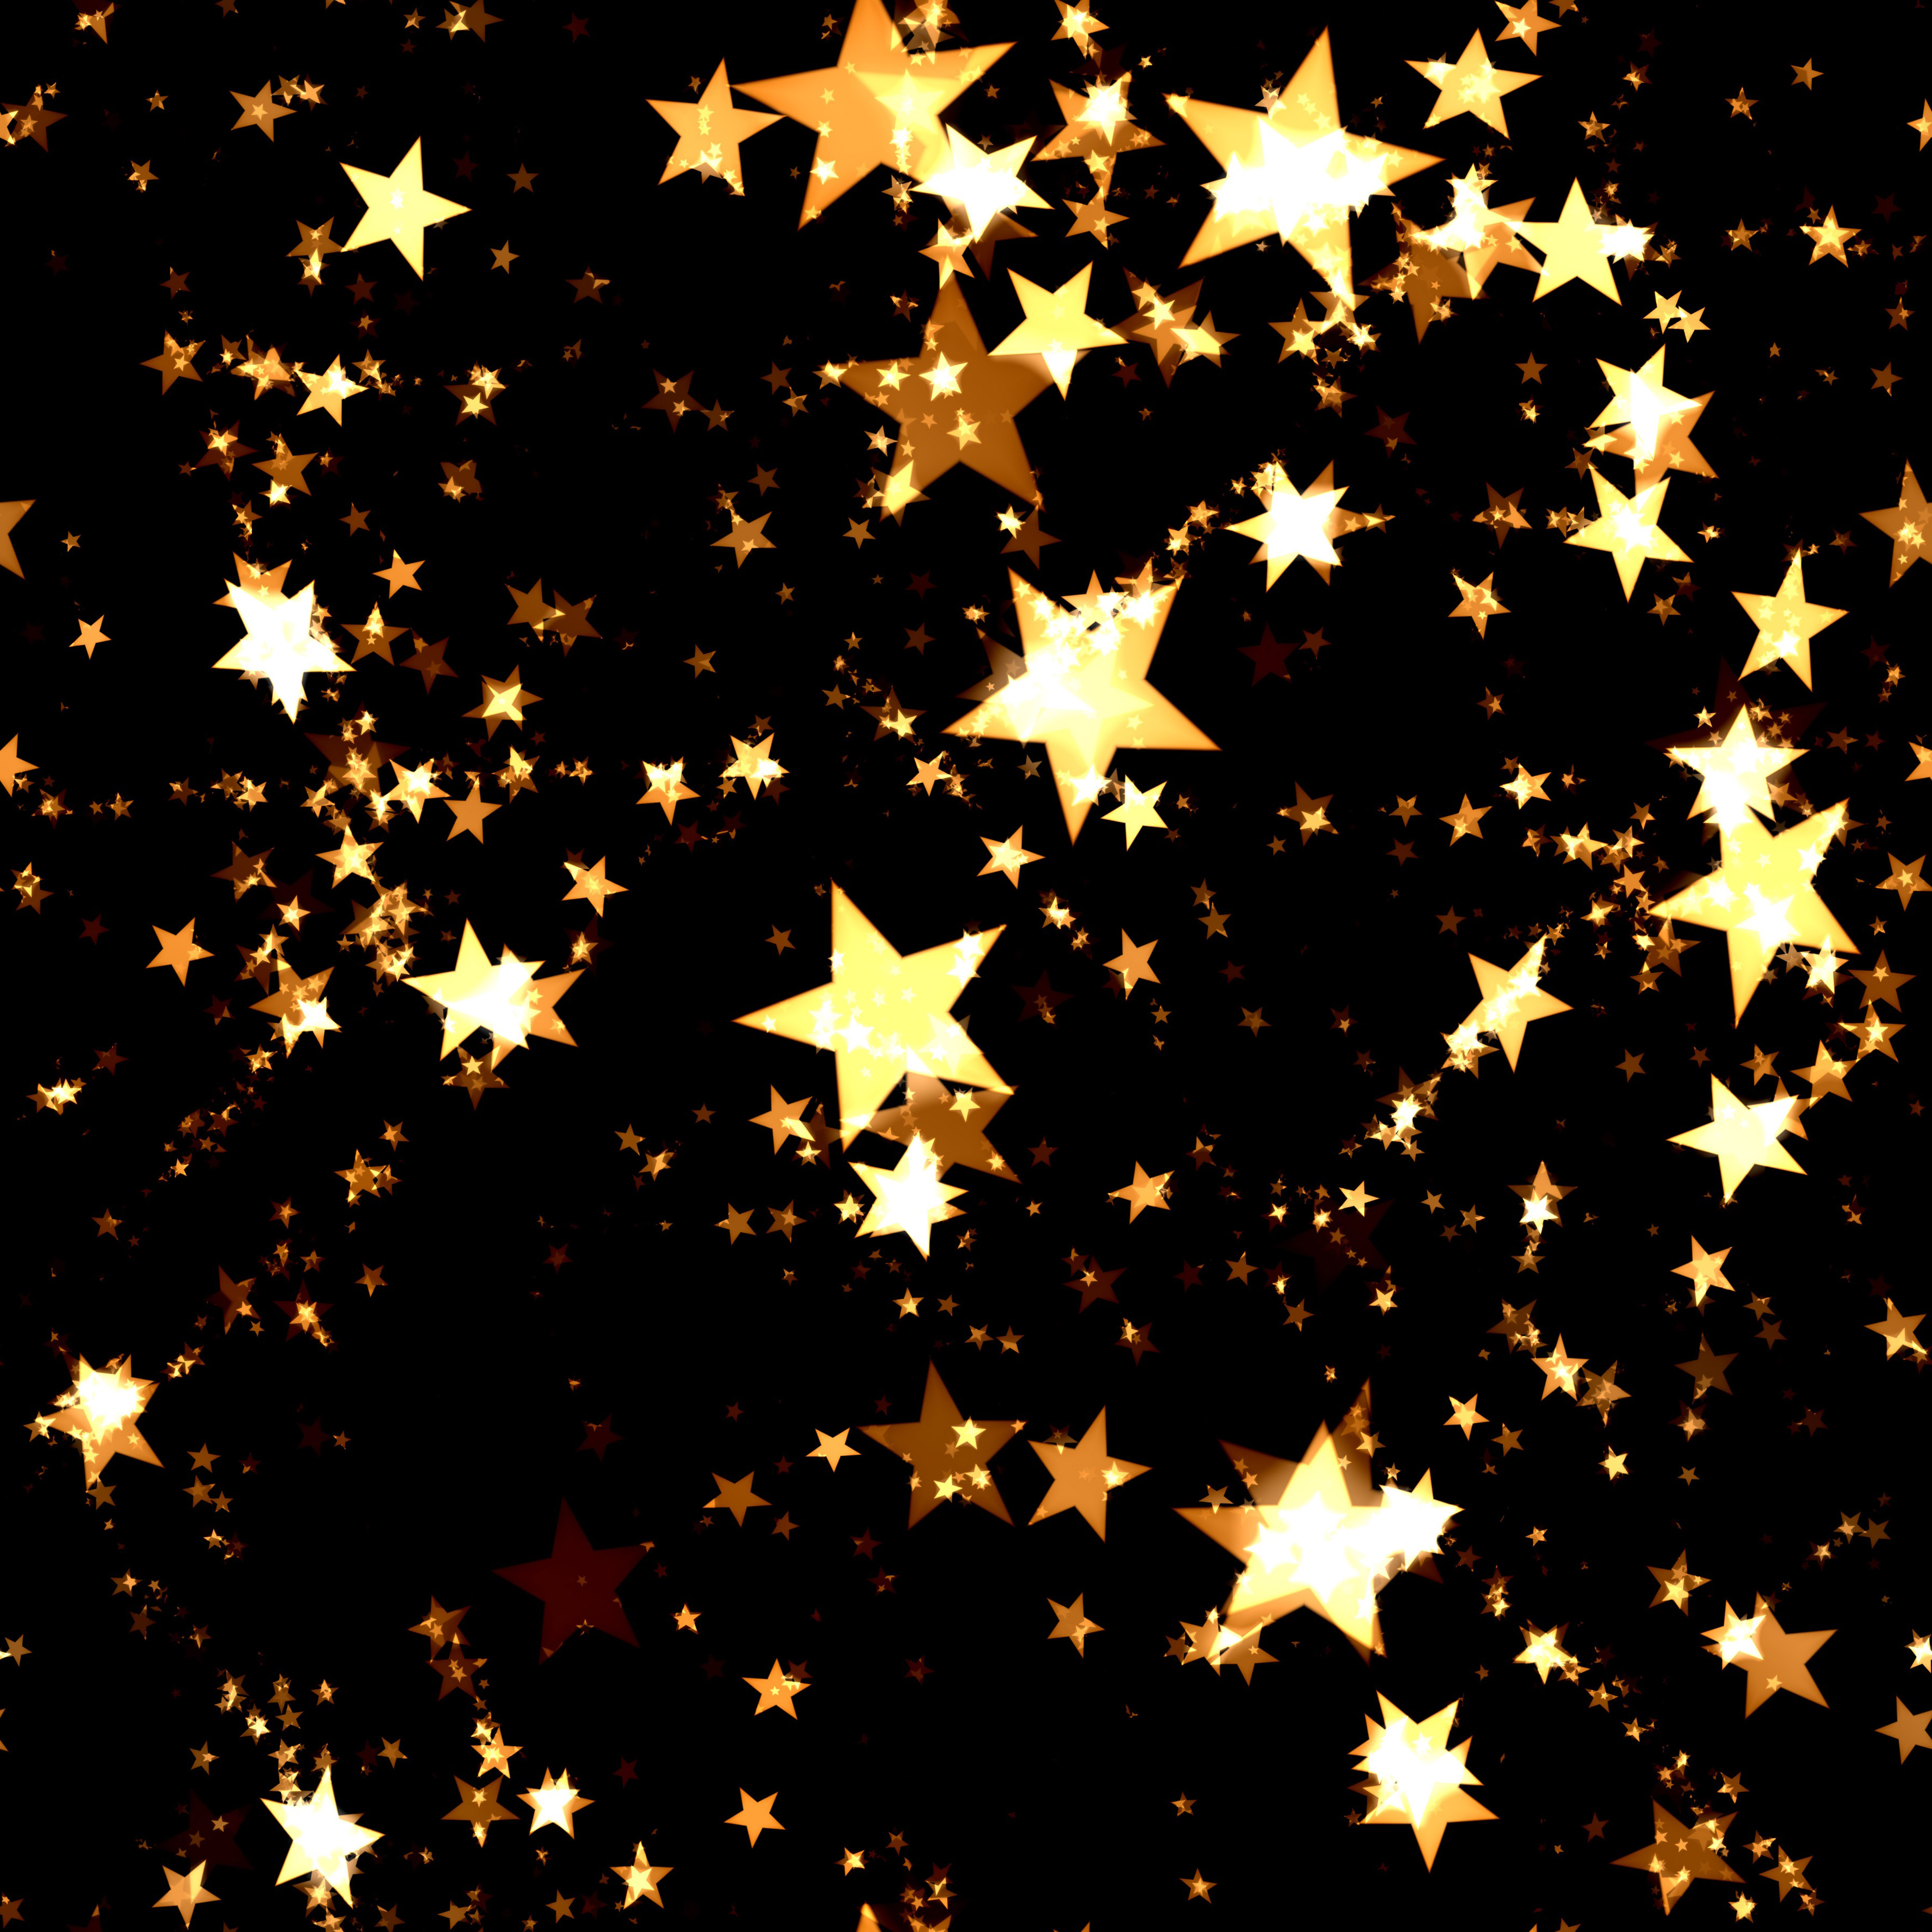  Stars at Xmas Background Images Cards or Christmas Wallpapers